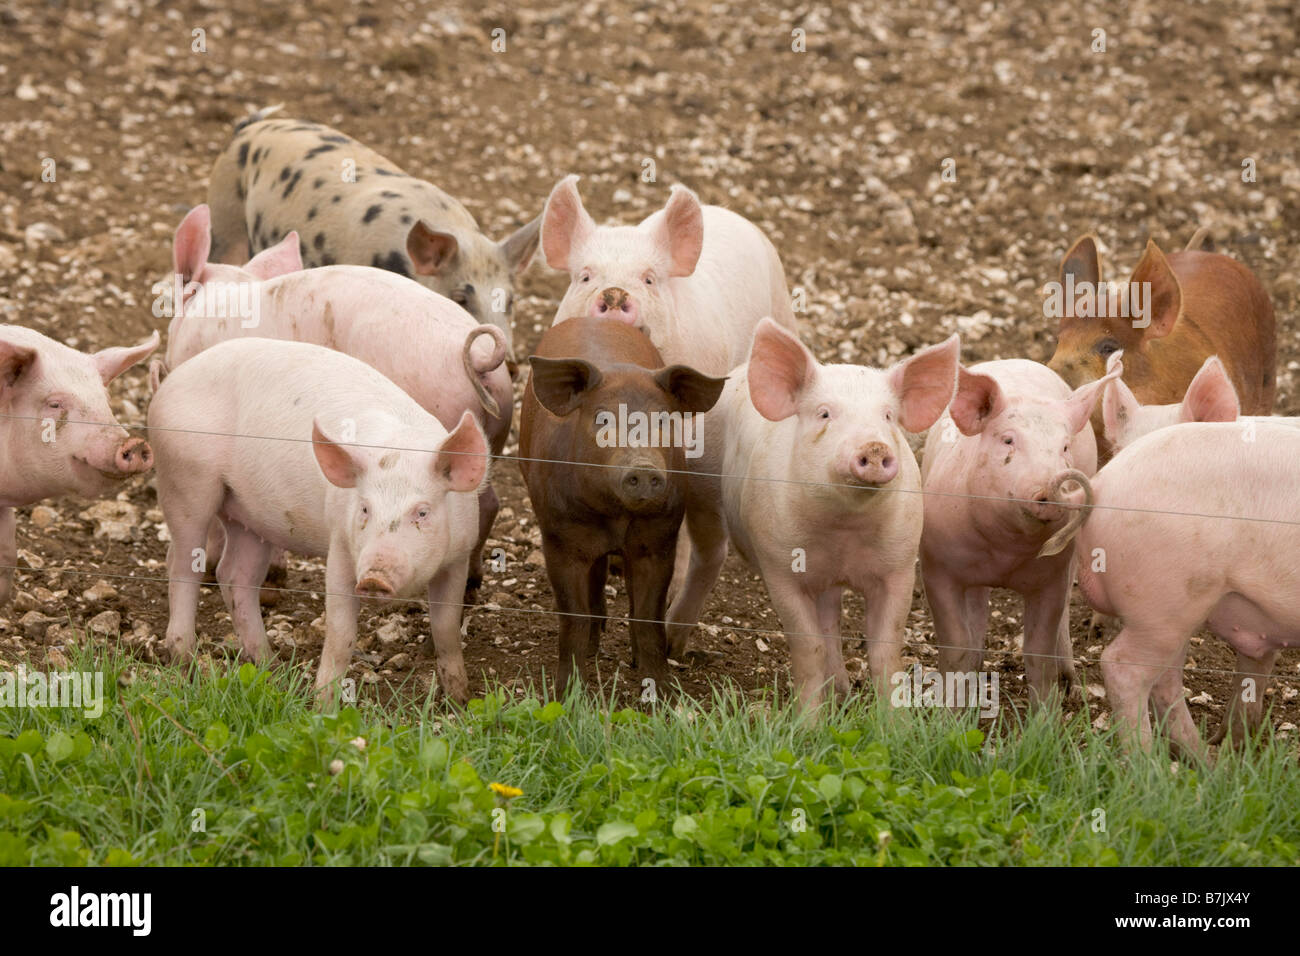 Pig farm with ark shelters Stock Photo